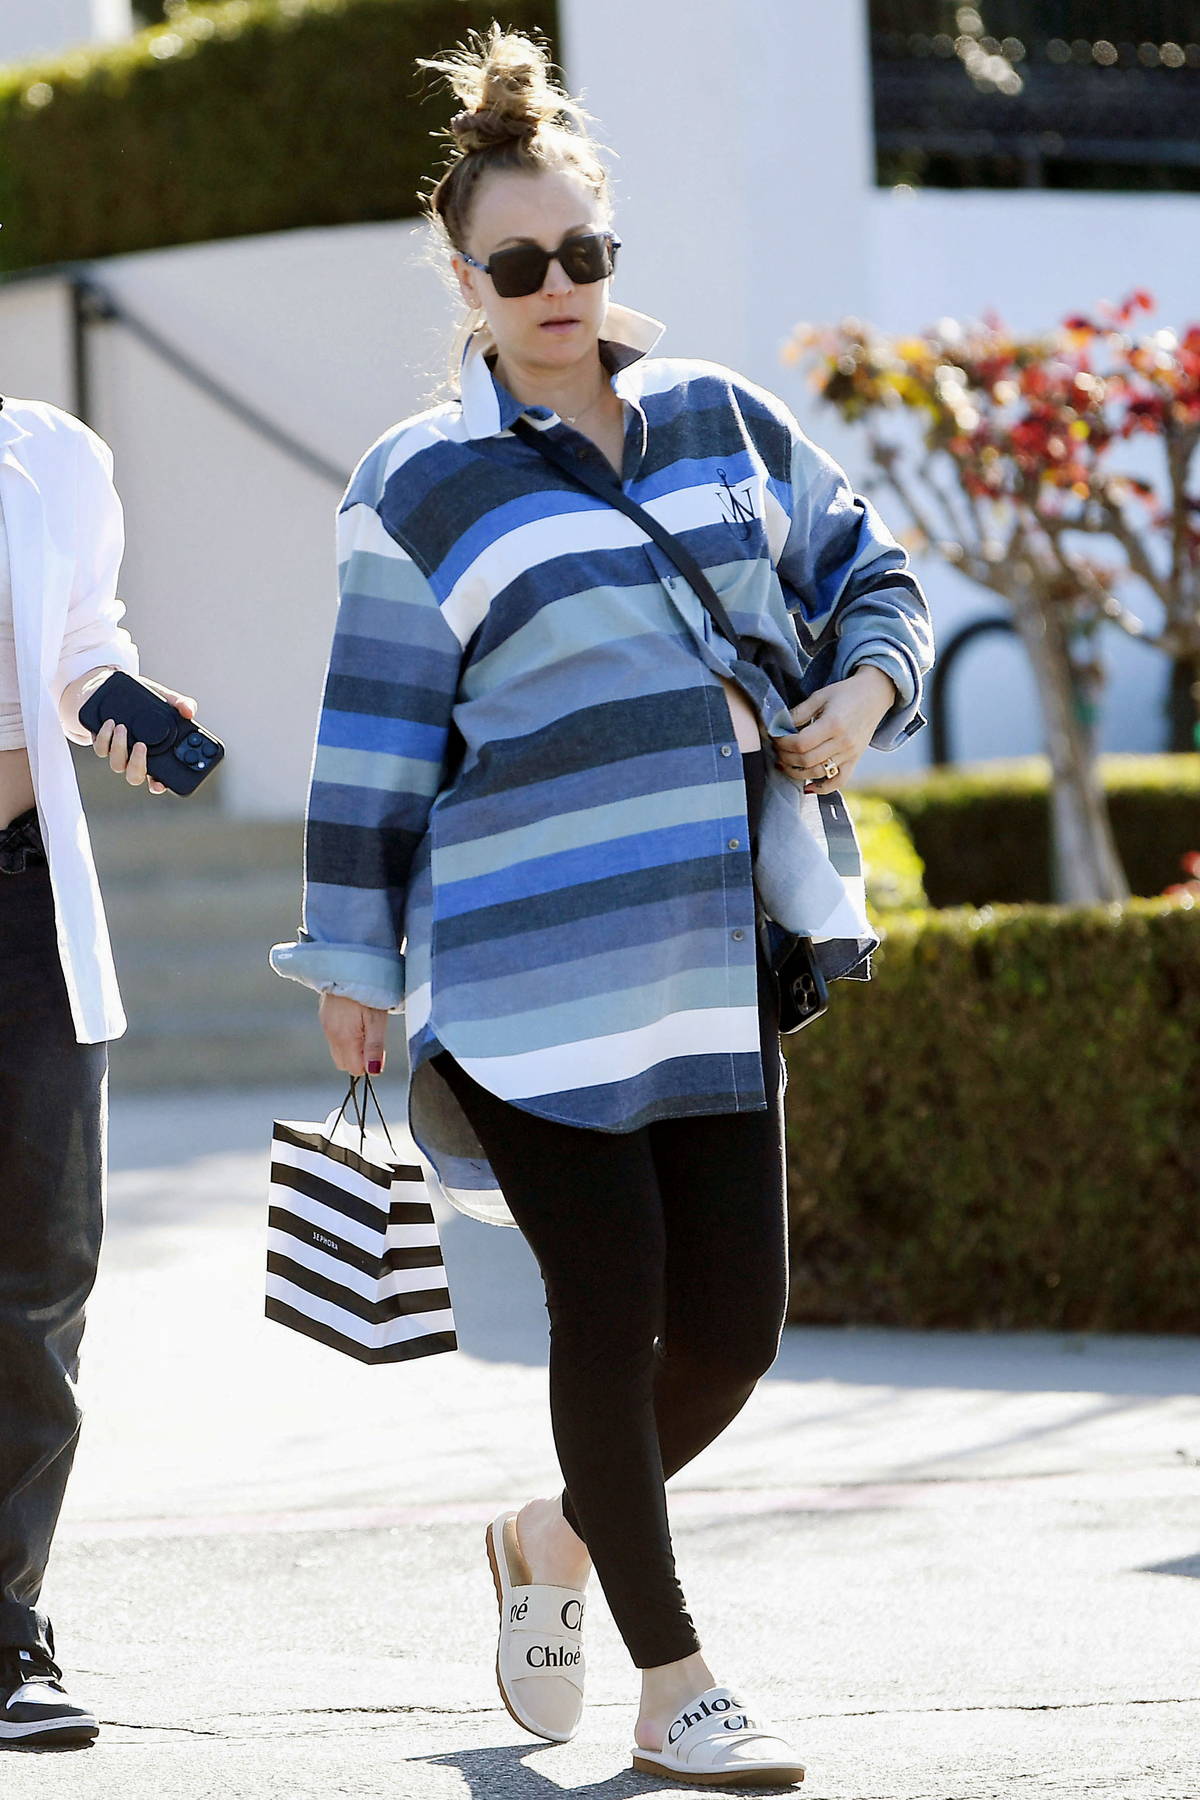 kaley cuoco shows her baby bump while out shopping with her sister